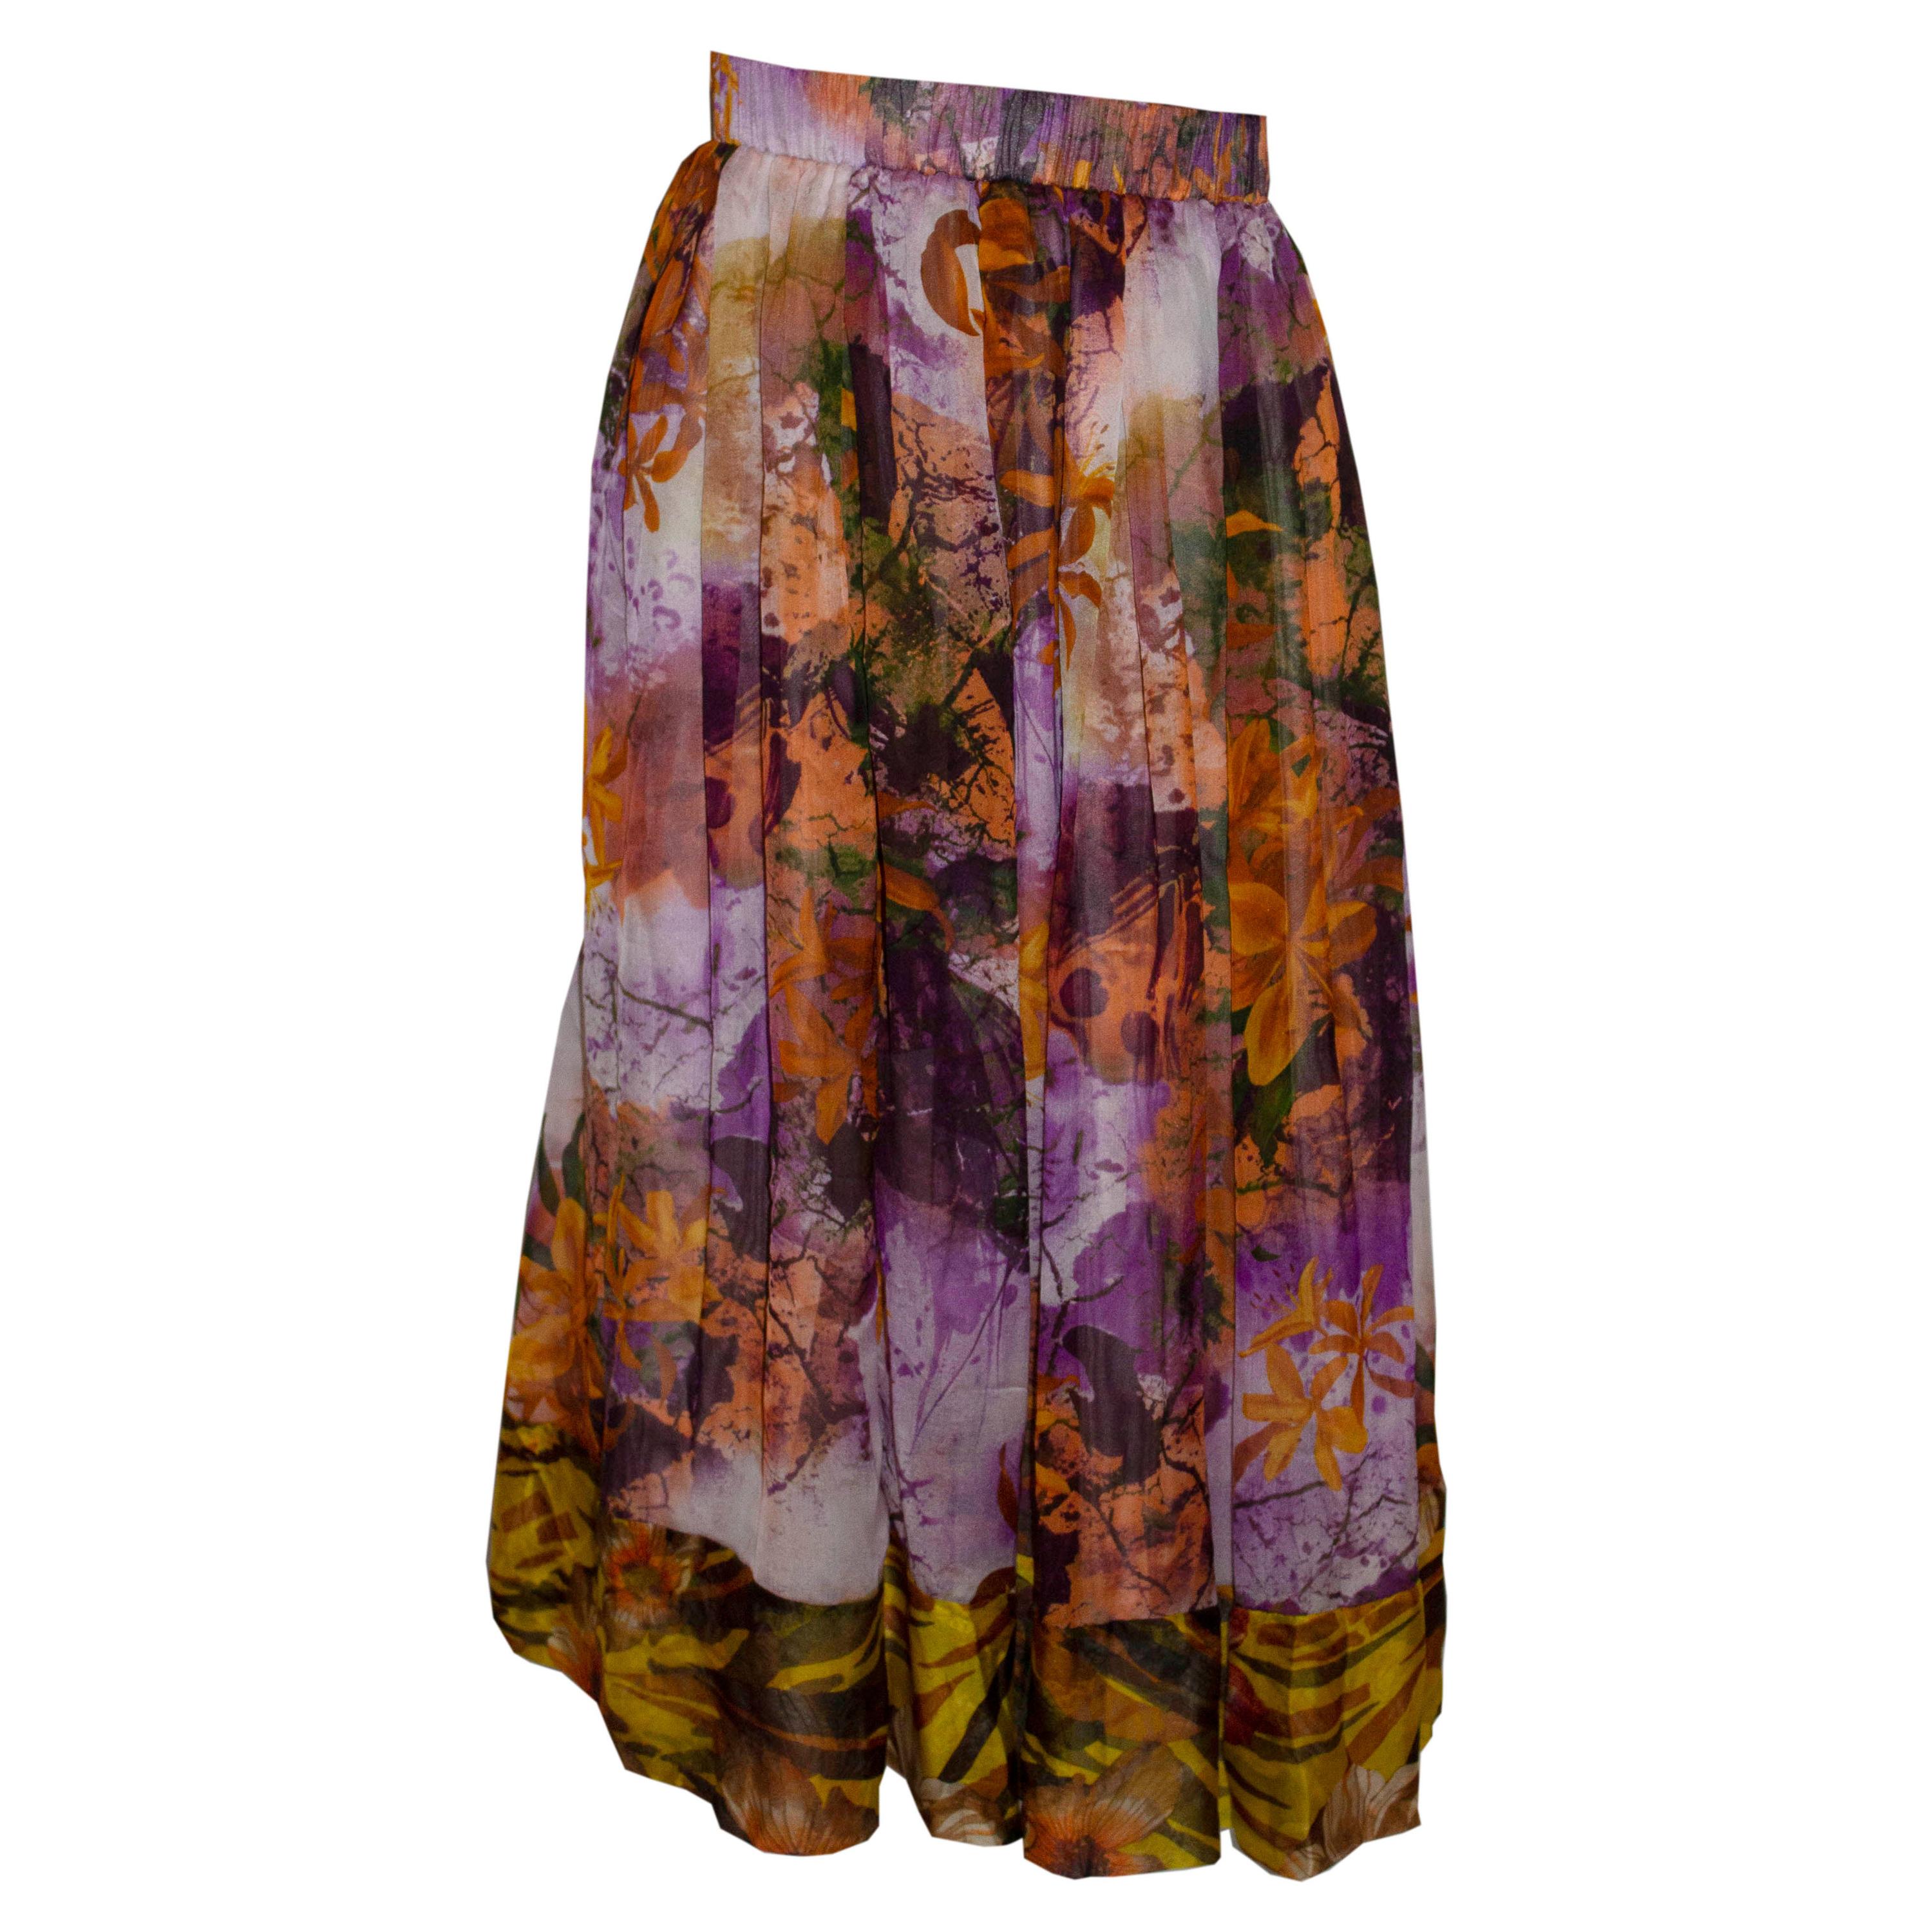 Colourful Silk Skirt by Duro Olowa For Sale